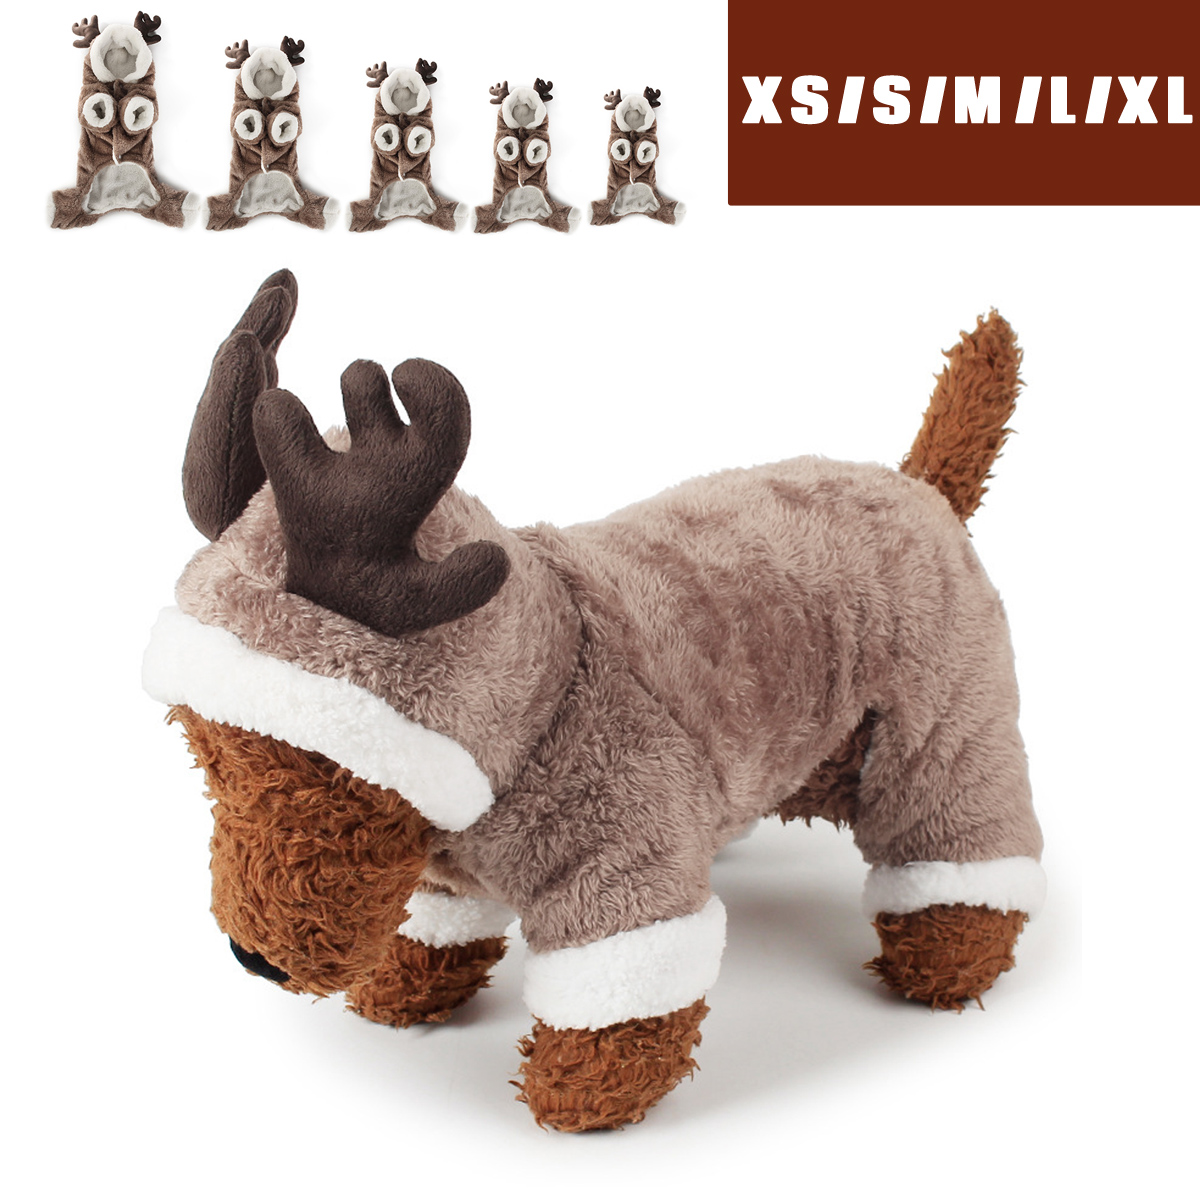 Pet-Dog-Cat-ElK-Costumes-Winter-Clothes-Puppy-Suit-Christmas-Party-Dress-Cosplay-1230102-2